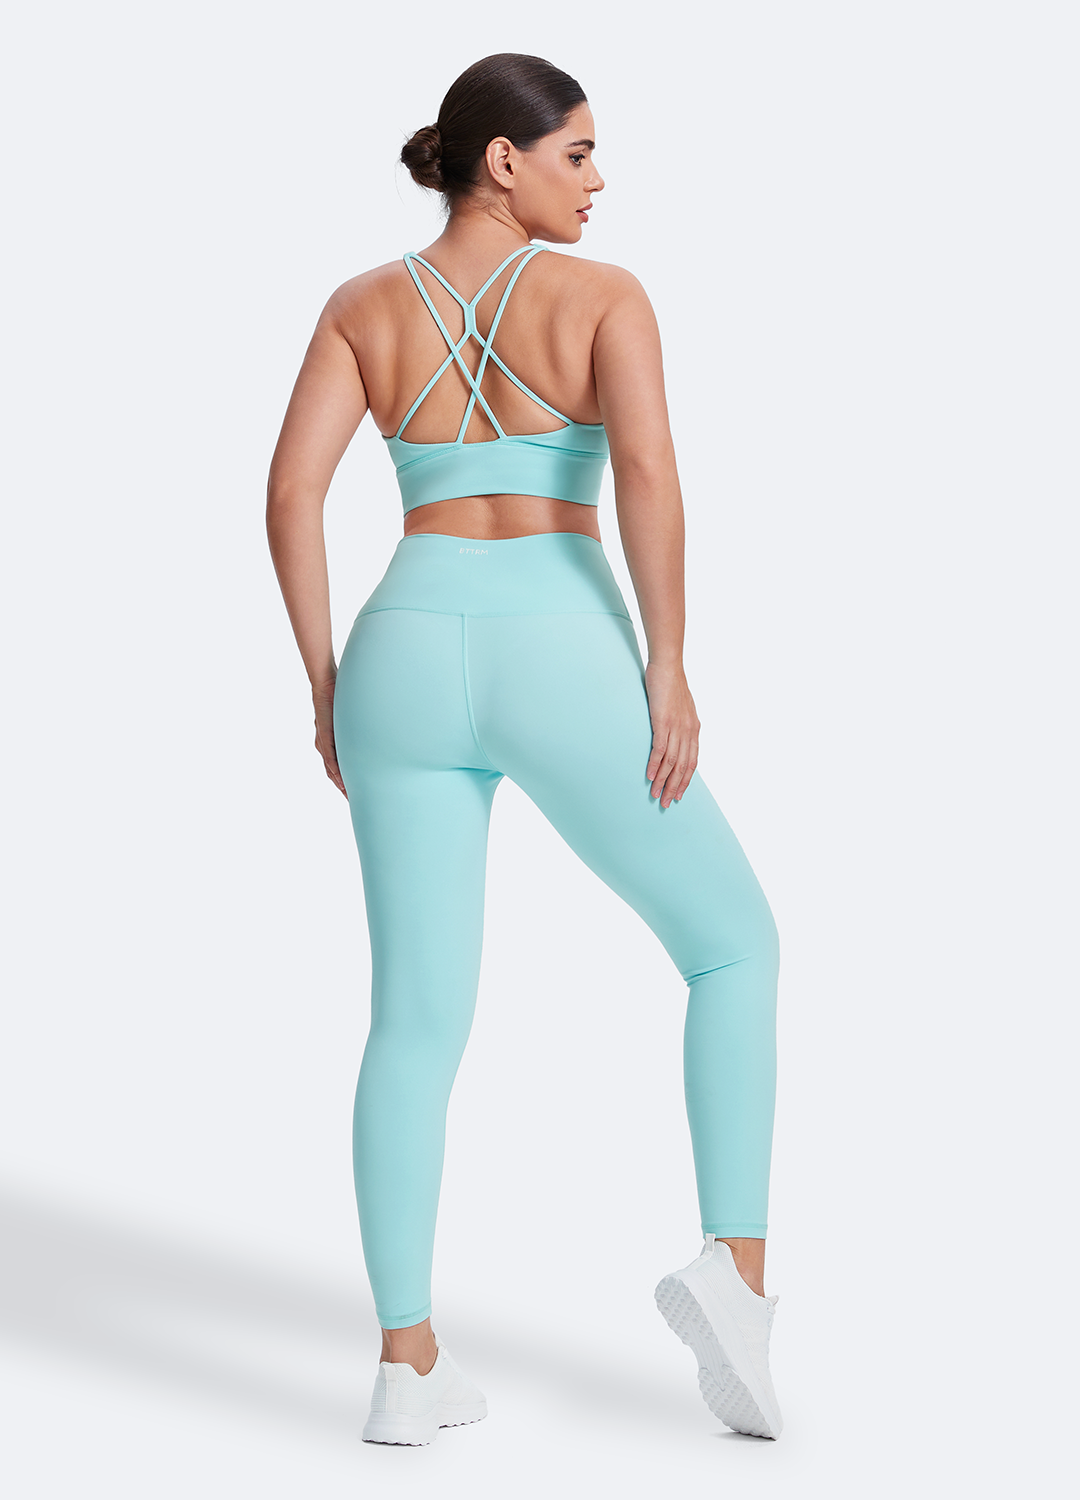 Straps and Support Bra & Pilates high-rise leggings set